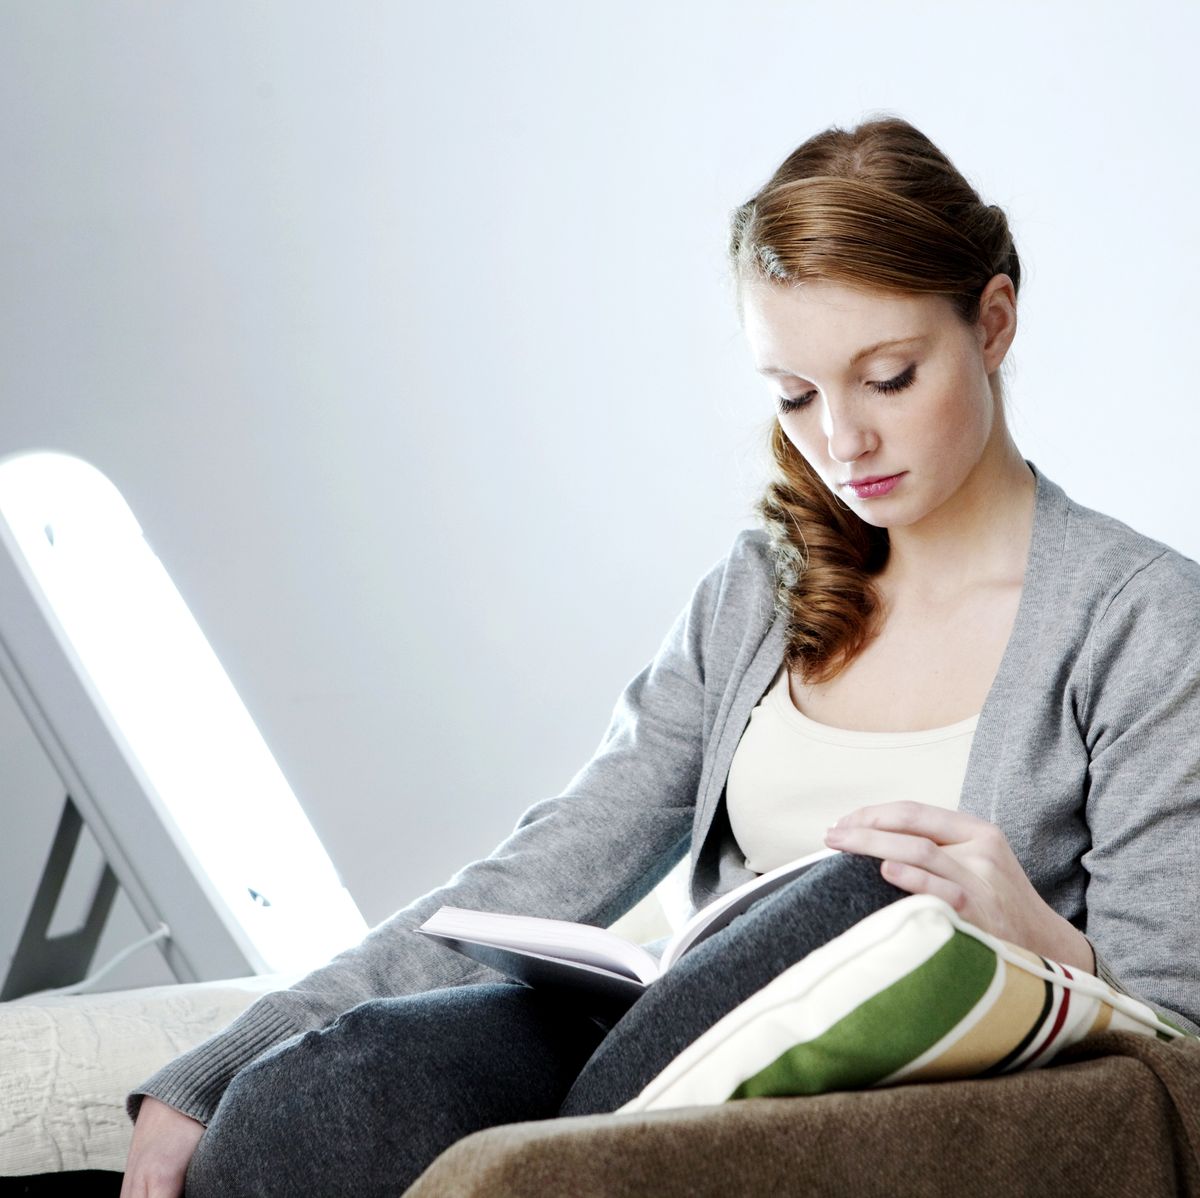 Woman light therapy